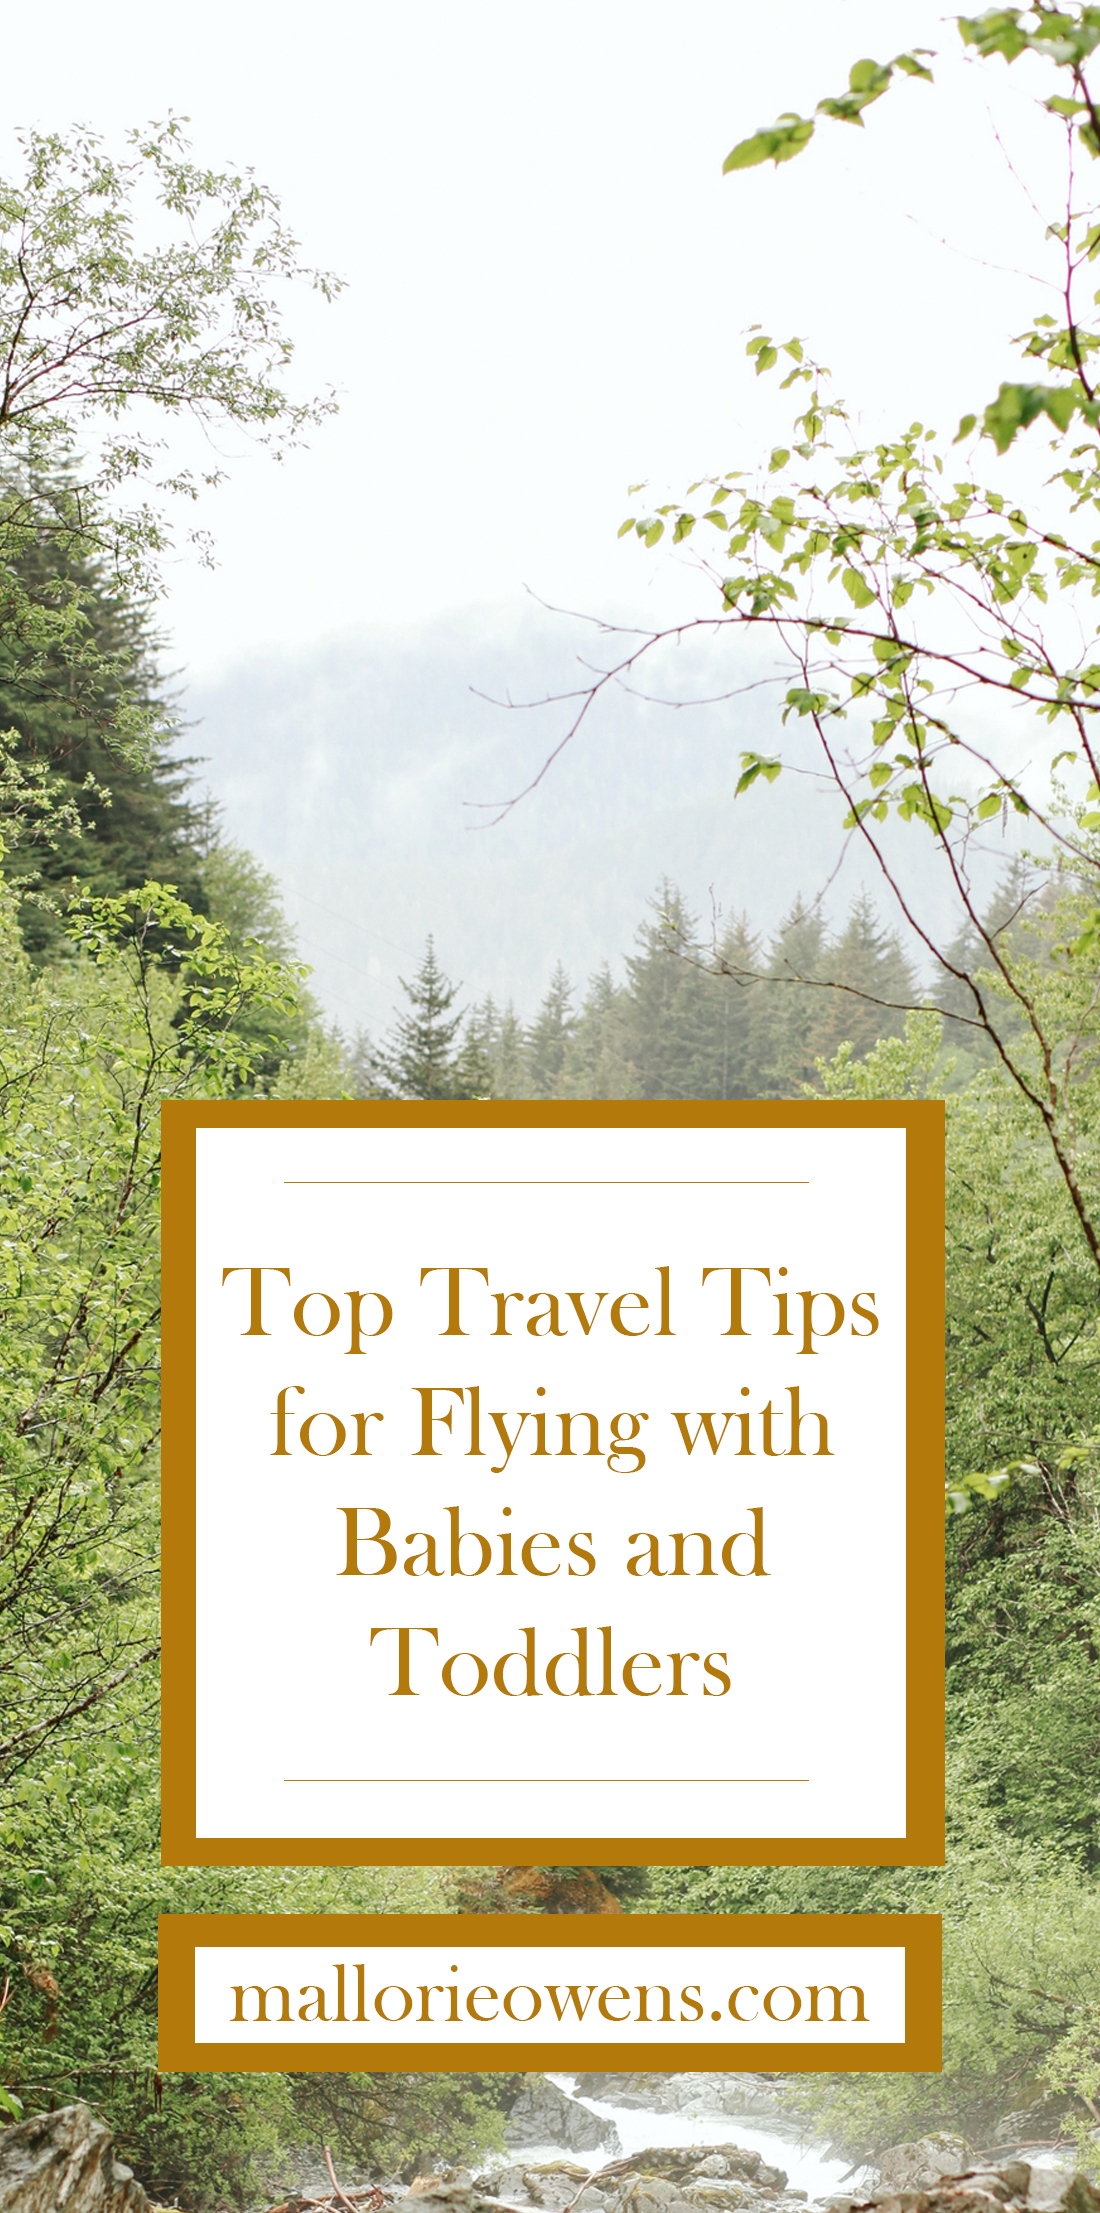 Top Travel Tips and Packing List for Babies and Toddlers